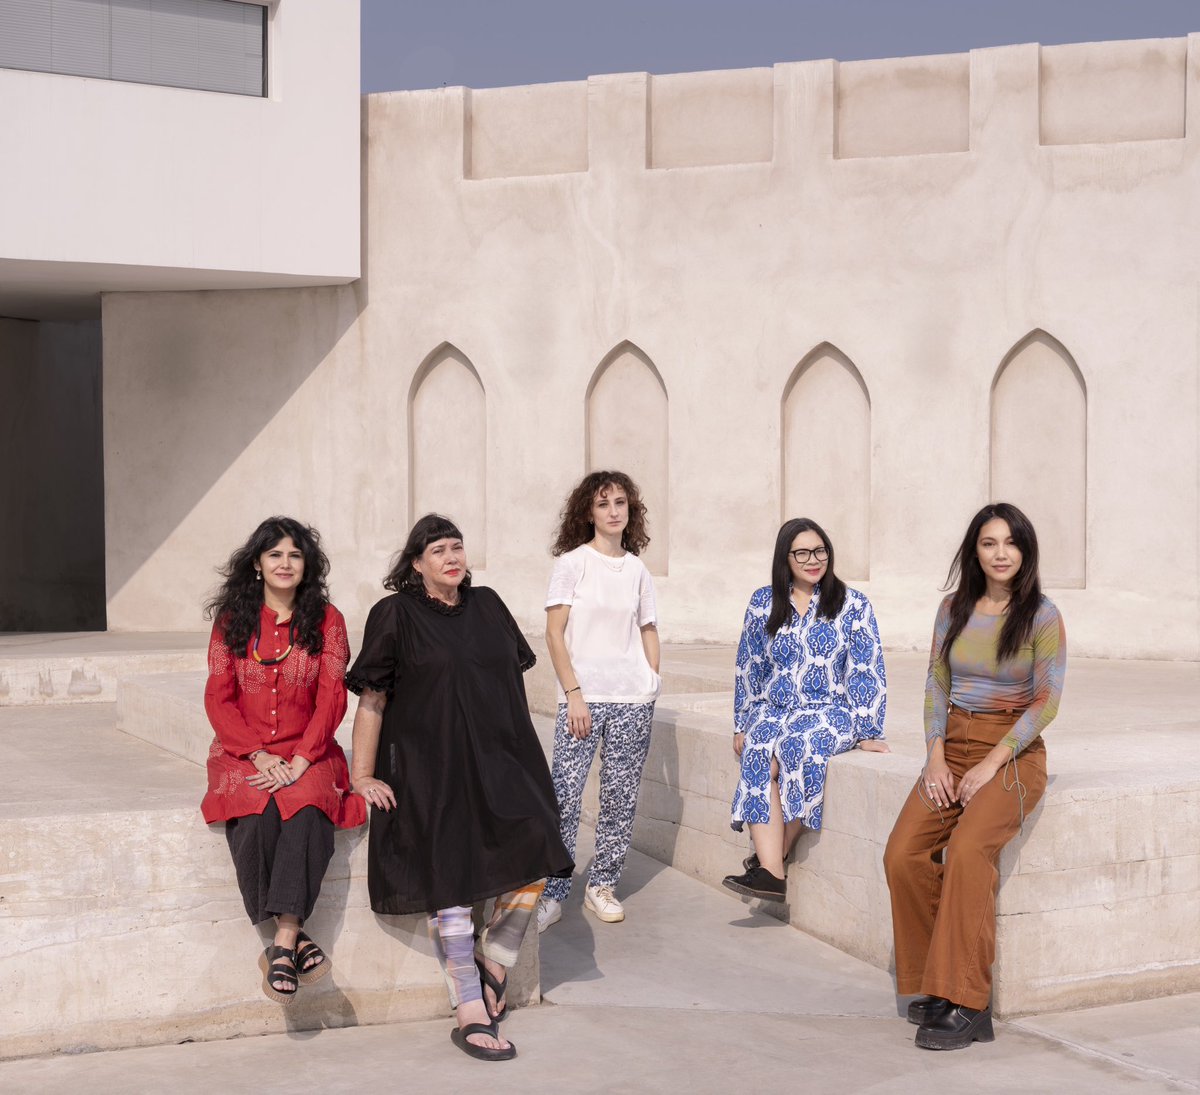 Announcing the curatorial framework and an initial selection of artists for Sharjah Biennial 16. The complete list of artists will be announced in the coming months. Visit sharjahart.org to find out more. #SB16 #SharjahArtFoundation